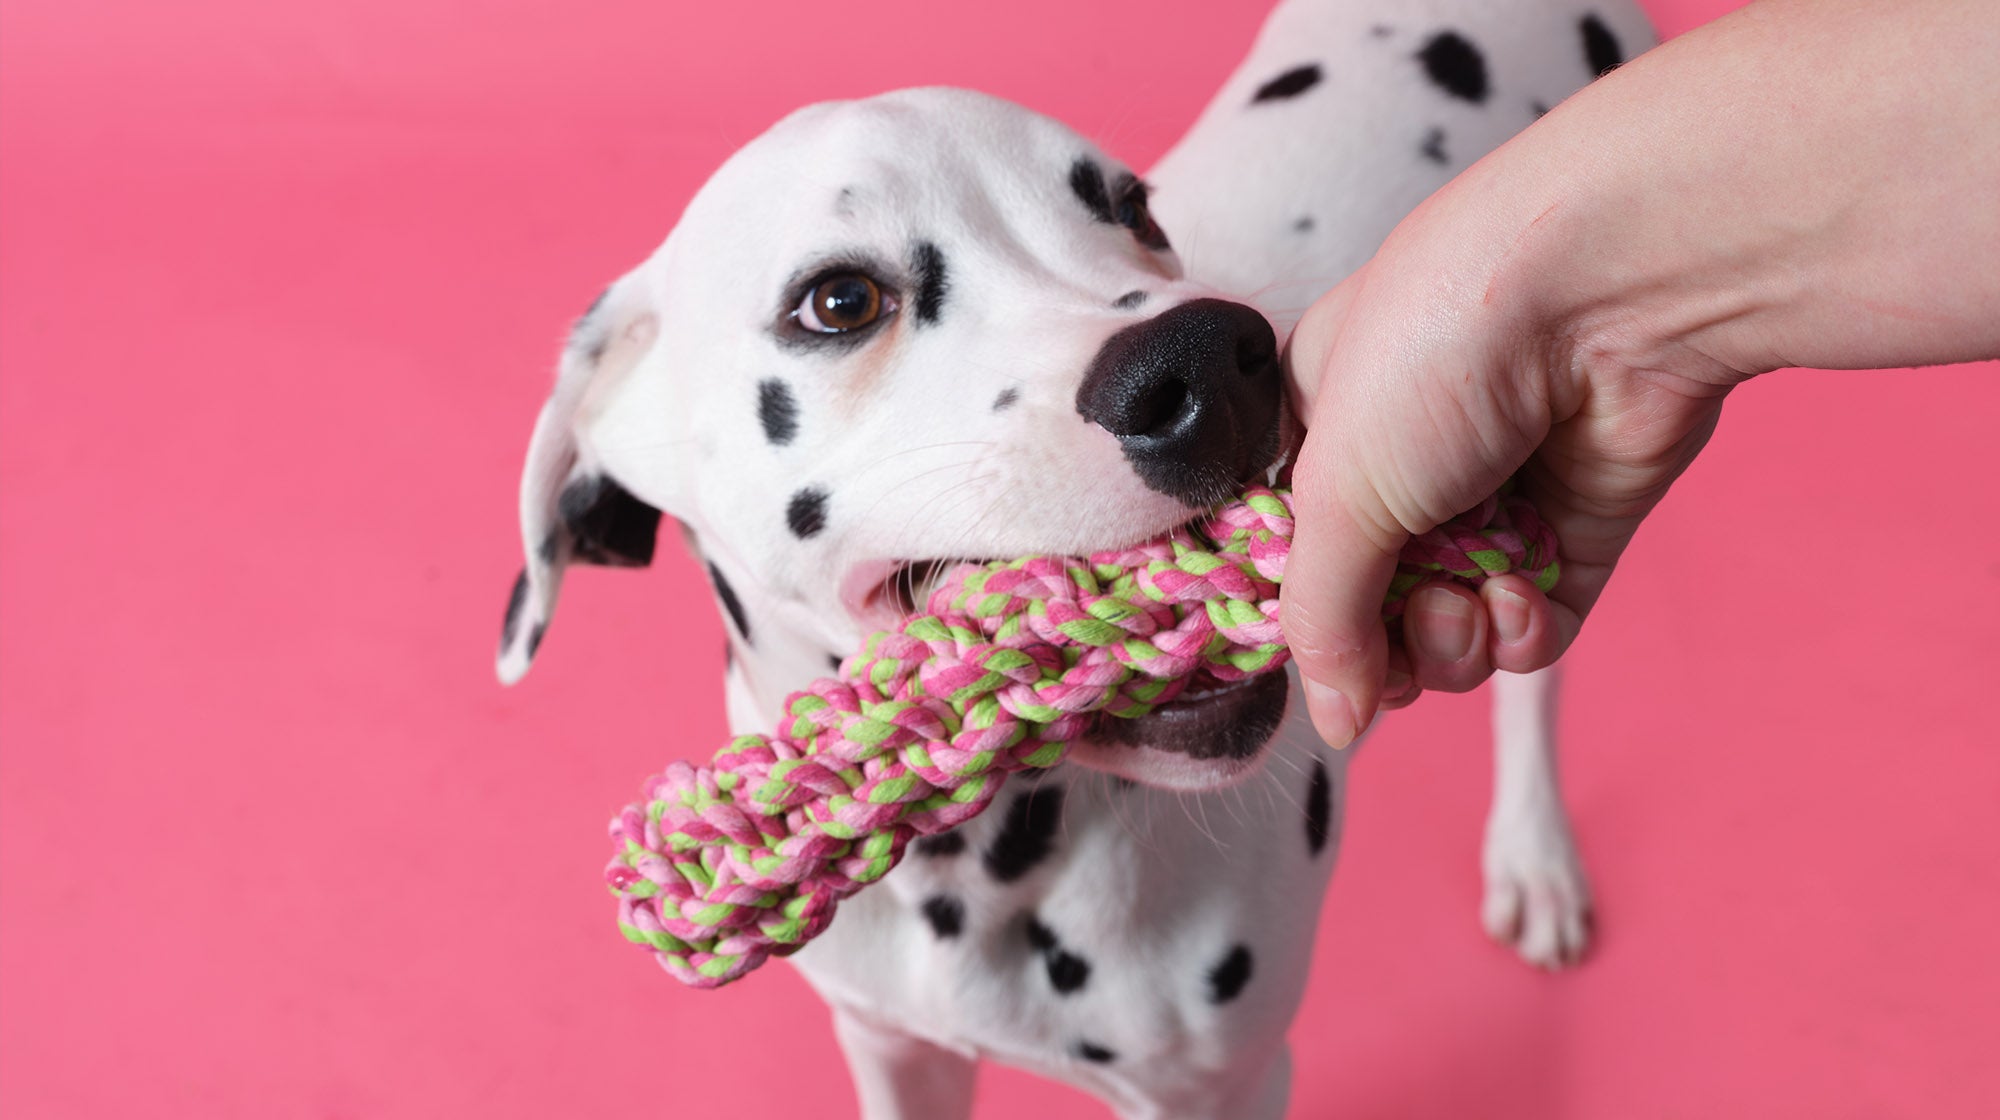 Dalmatian dog with toy in mouth on a pink background